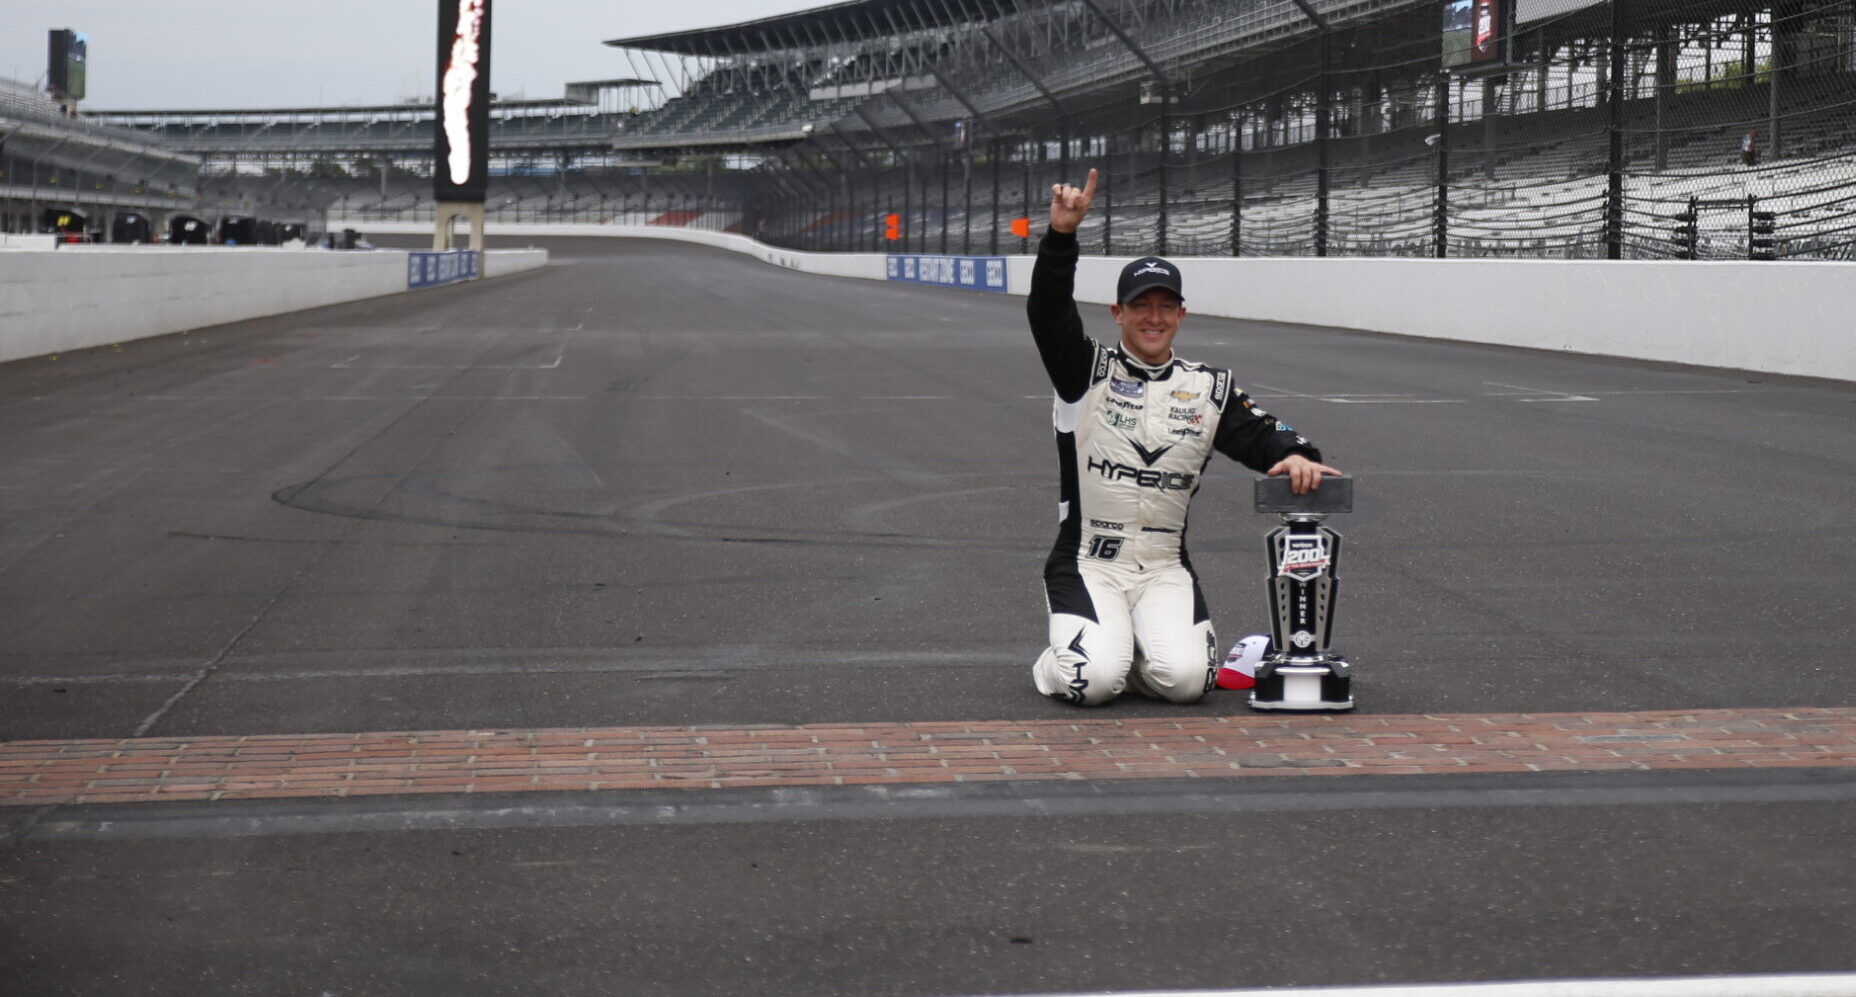 By all means, AJ Allmendinger enjoys his Verizon 200 at Indianapolis victory. (Photo: Stephen Conley | The Podium Finish)